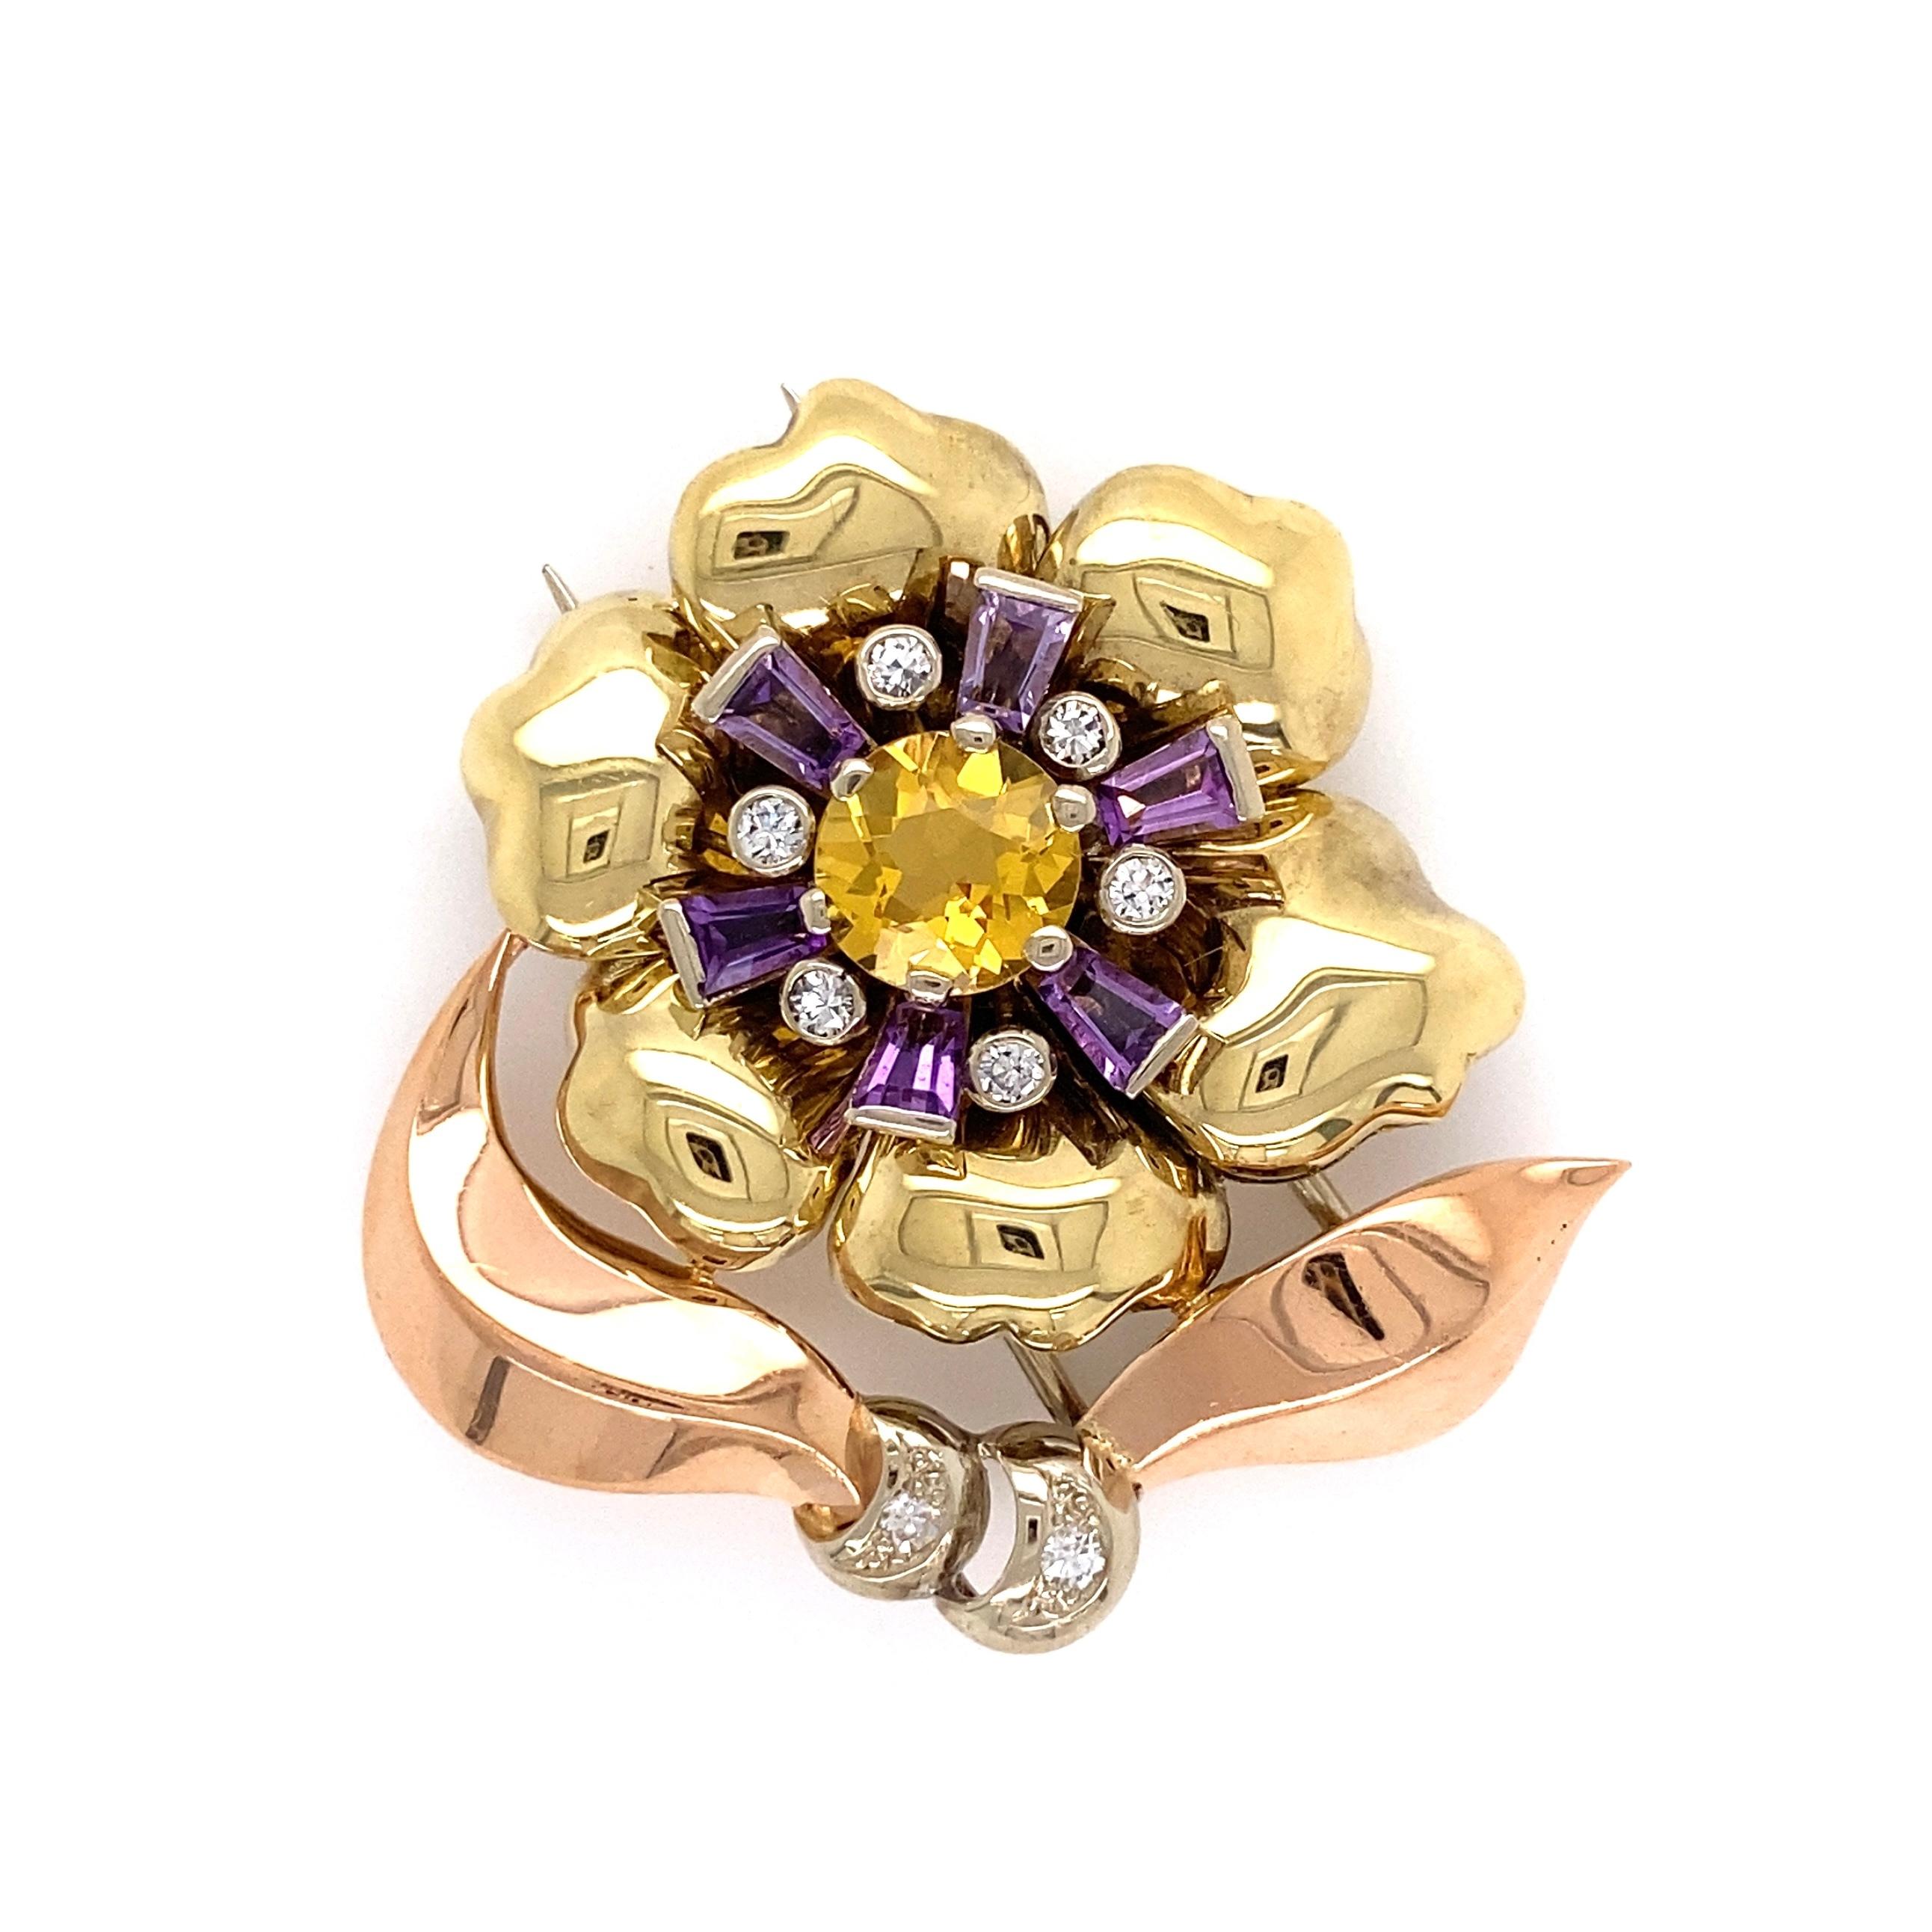 Simply Beautiful and finely detailed Retro Stylized Flower Design Gold Brooch Hand set with 8 Diamonds, approx. 0.35tcw, 1 Citrine approx. 1.15ct and 6 Baguette Amethyst approx. 0.50tcw. Approx. 1.25”H x 1.1” W. Hand crafted in 18 Karat Green and